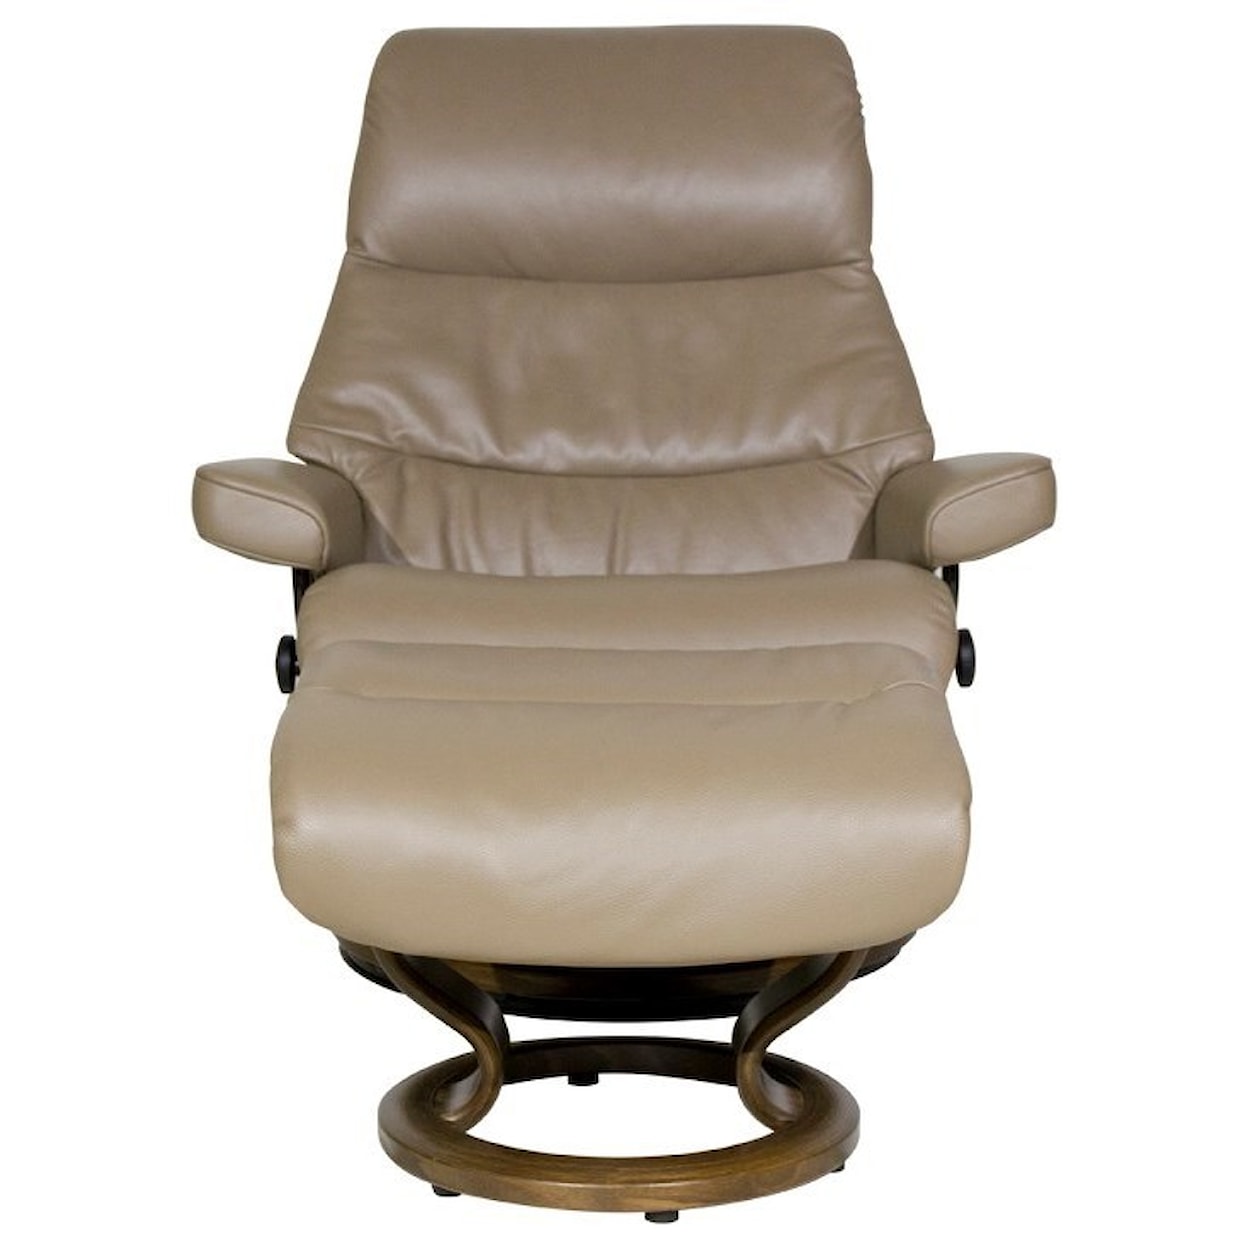 Stressless by Ekornes View Large Chair & Ottoman with Classic Base